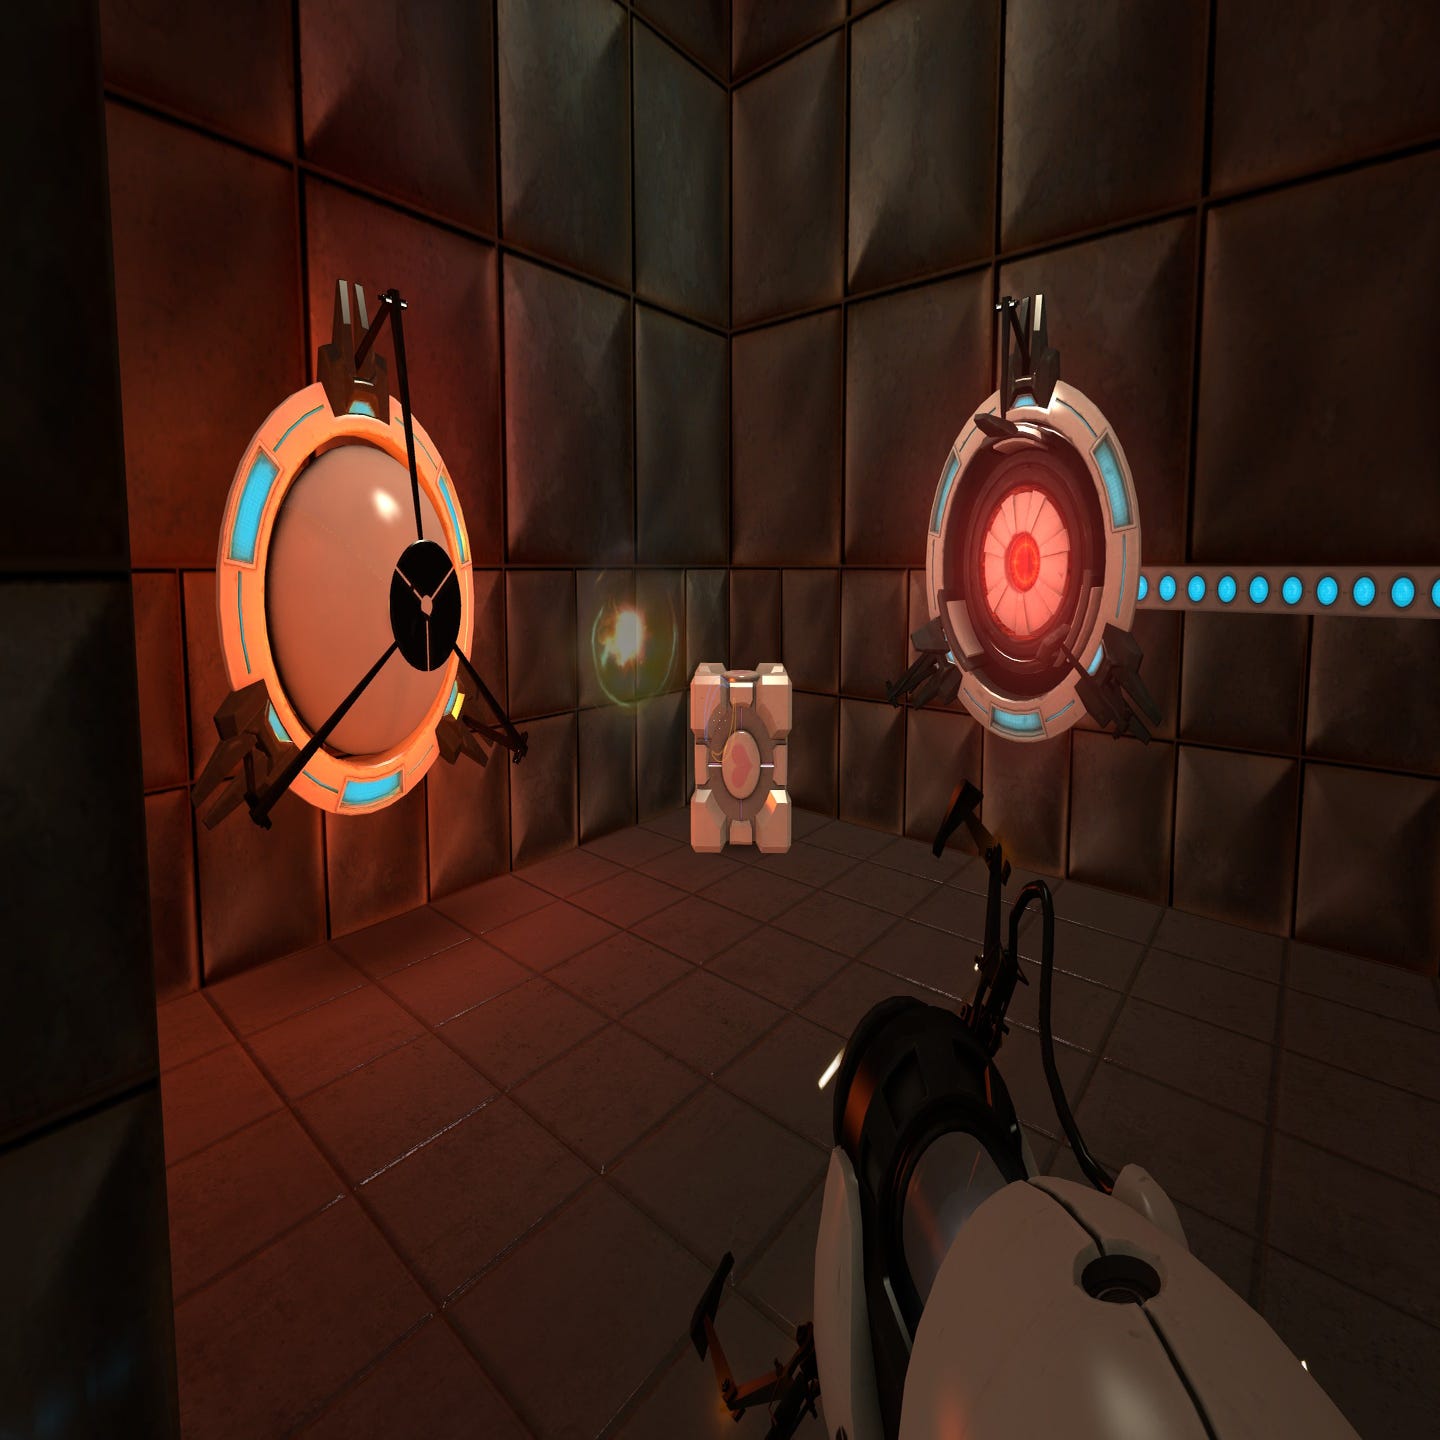 Portal with RTX review: Ray tracing makes Valve's puzzle FPS spooky -  Polygon